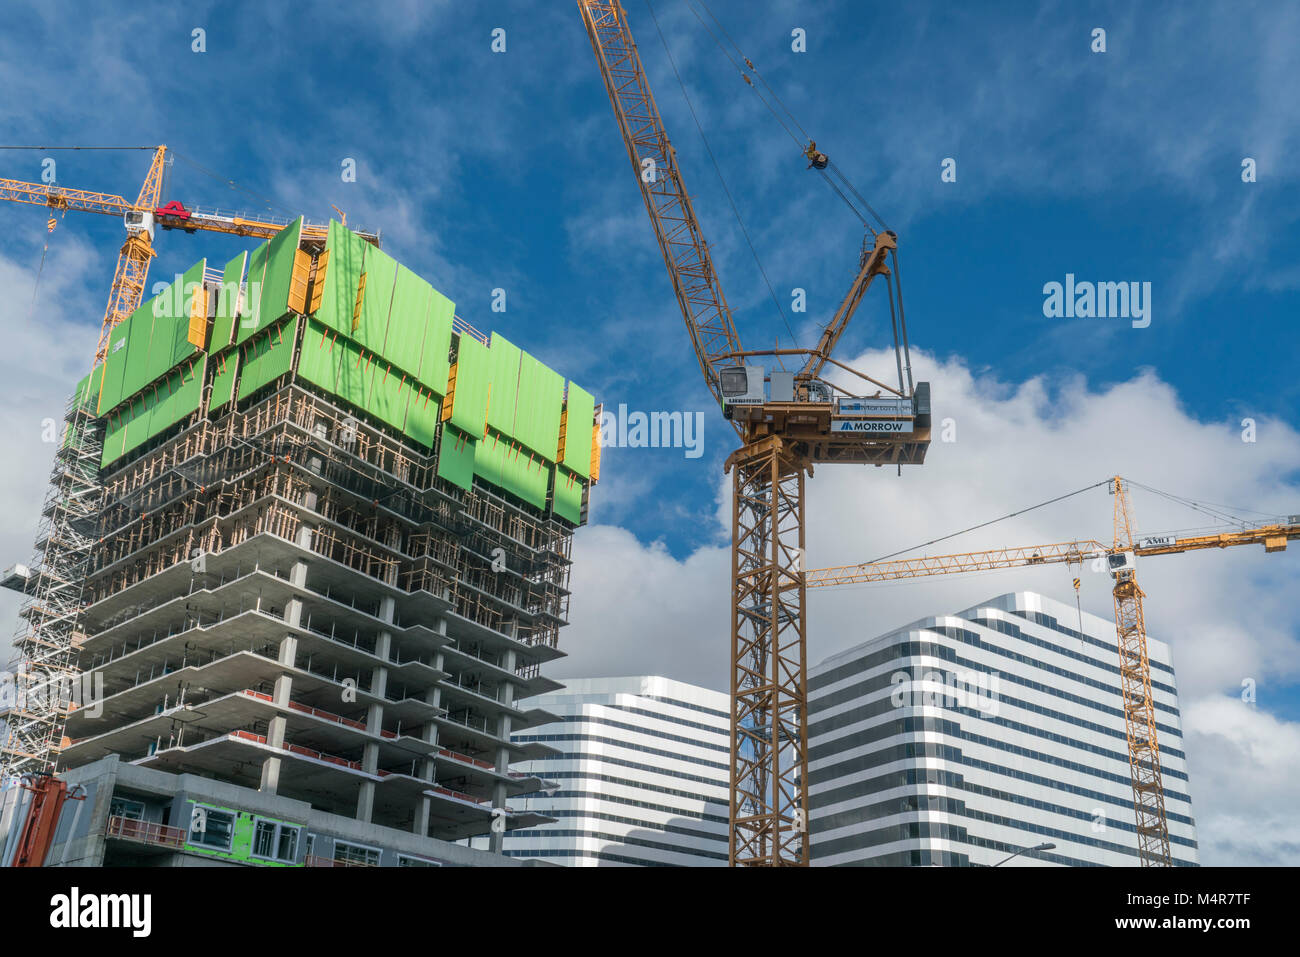 United States, Washington, Seattle, Construction of a building with cranes Stock Photo